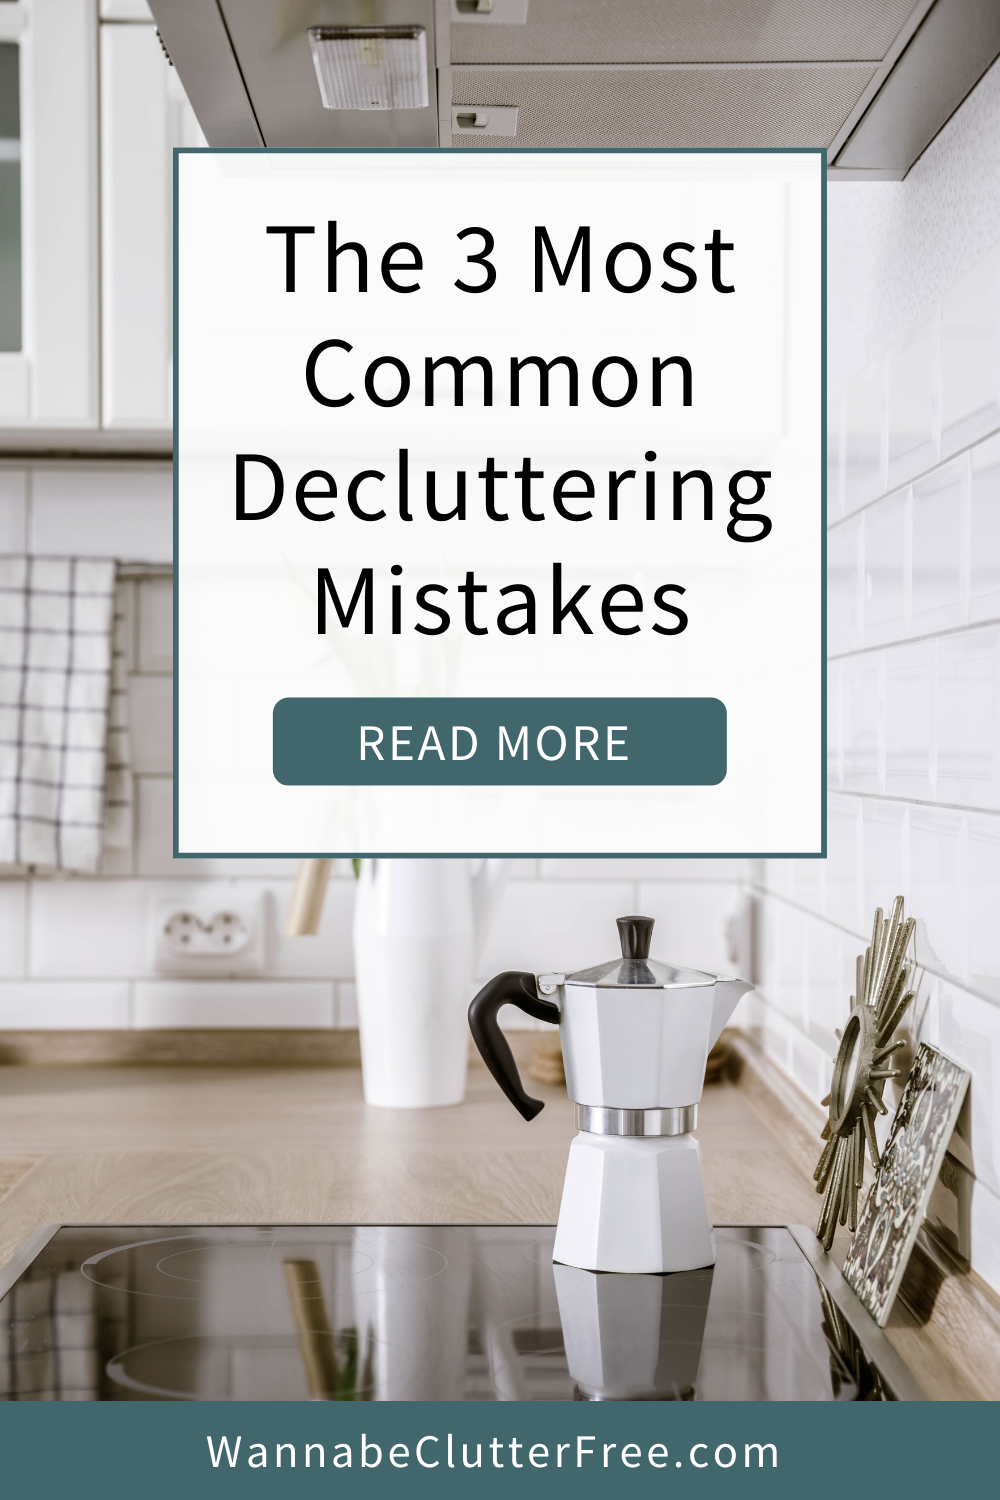 The 3 Most Common Decluttering Mistakes